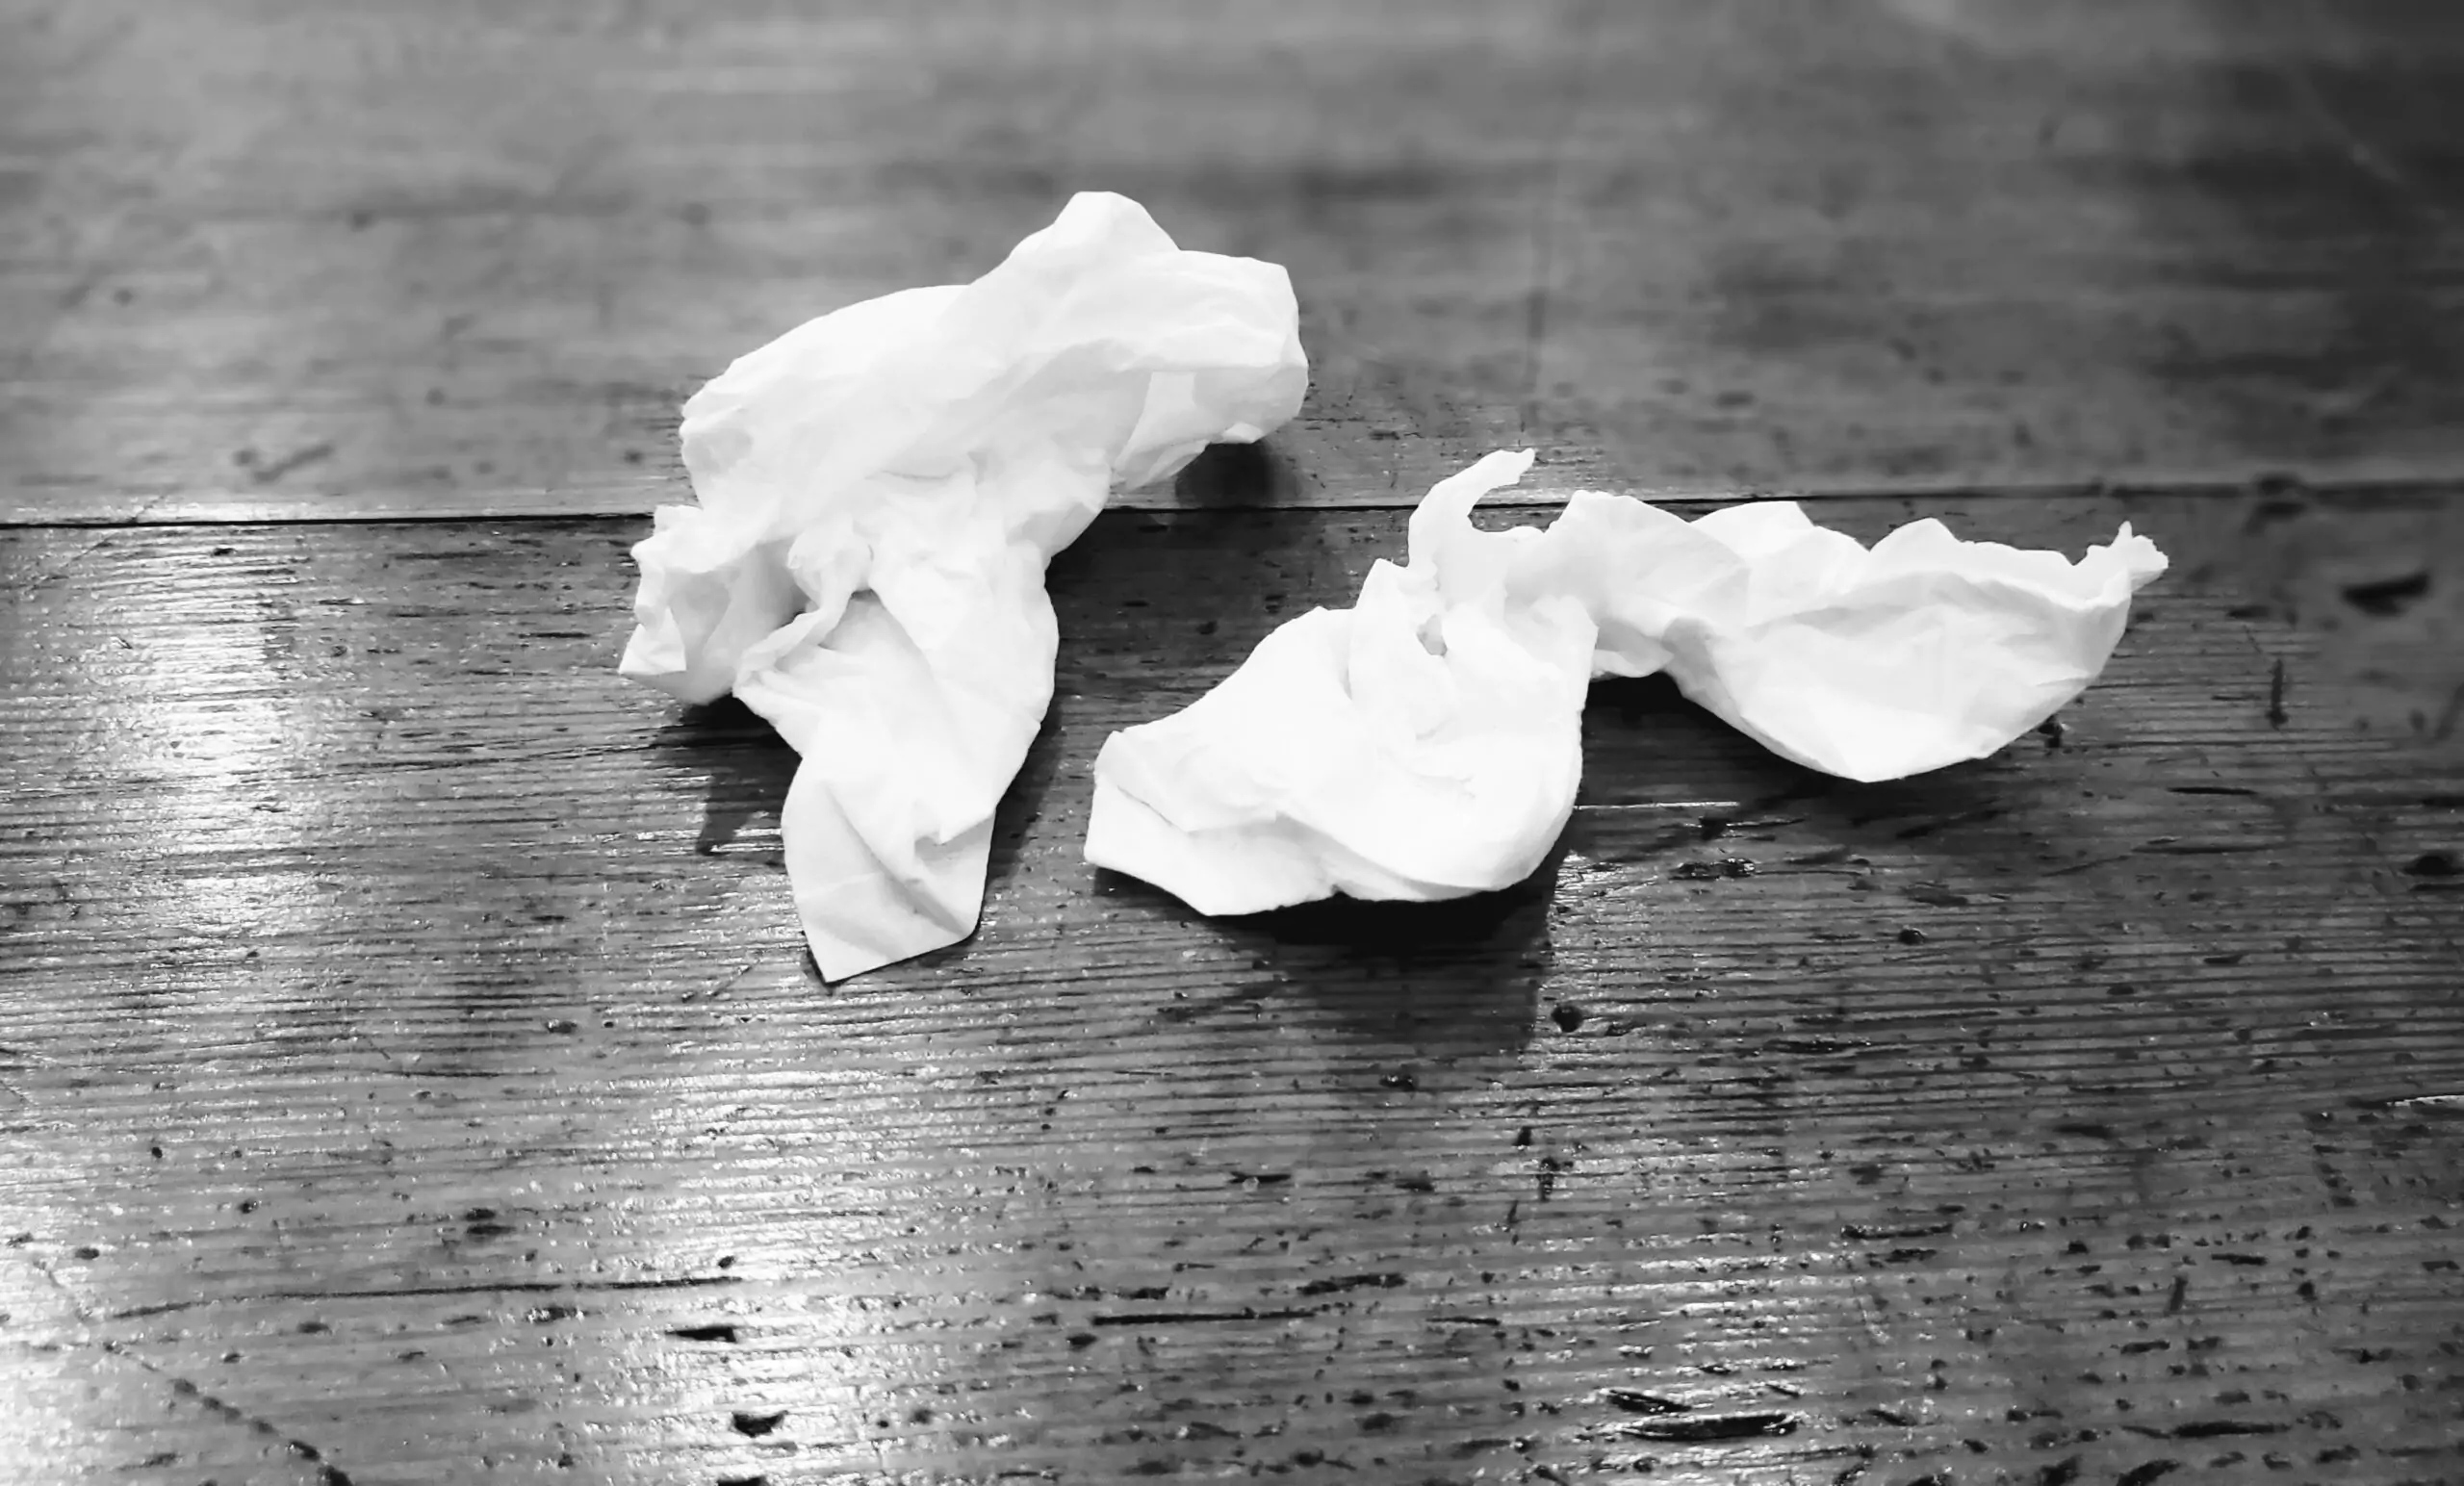 Black and white photo of used tissues